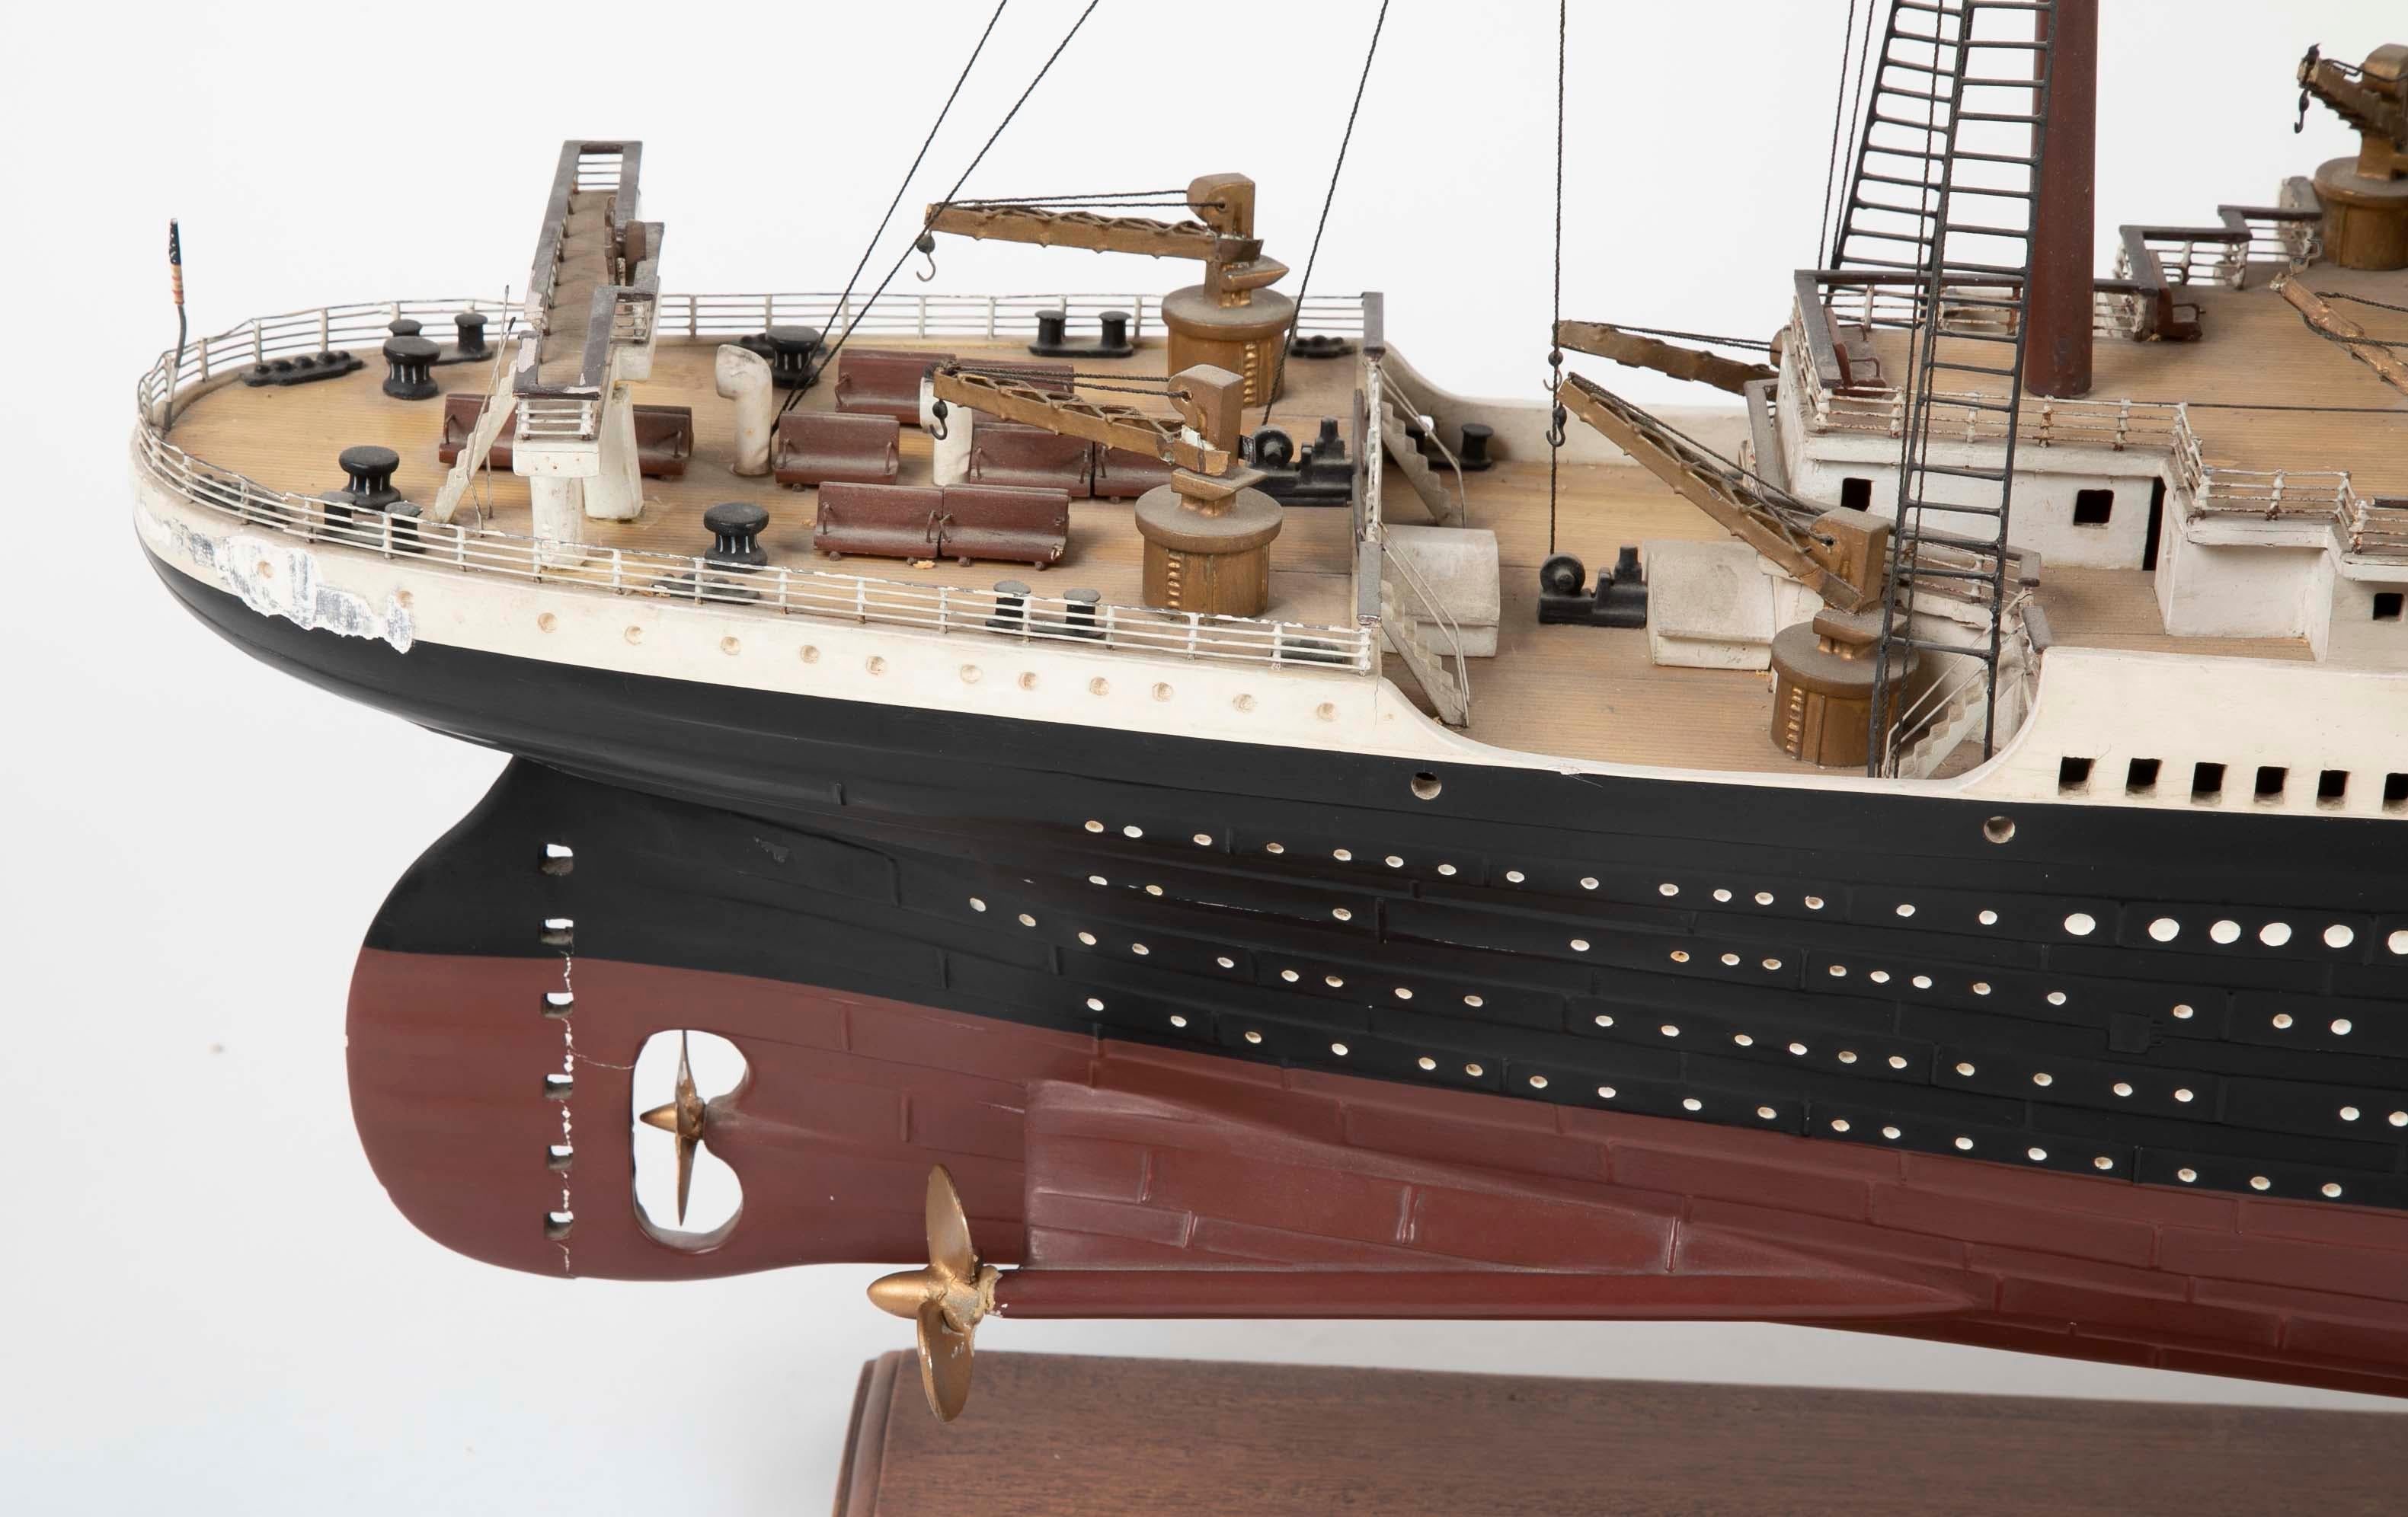 Detailed Model of the White Star Liner RMS 